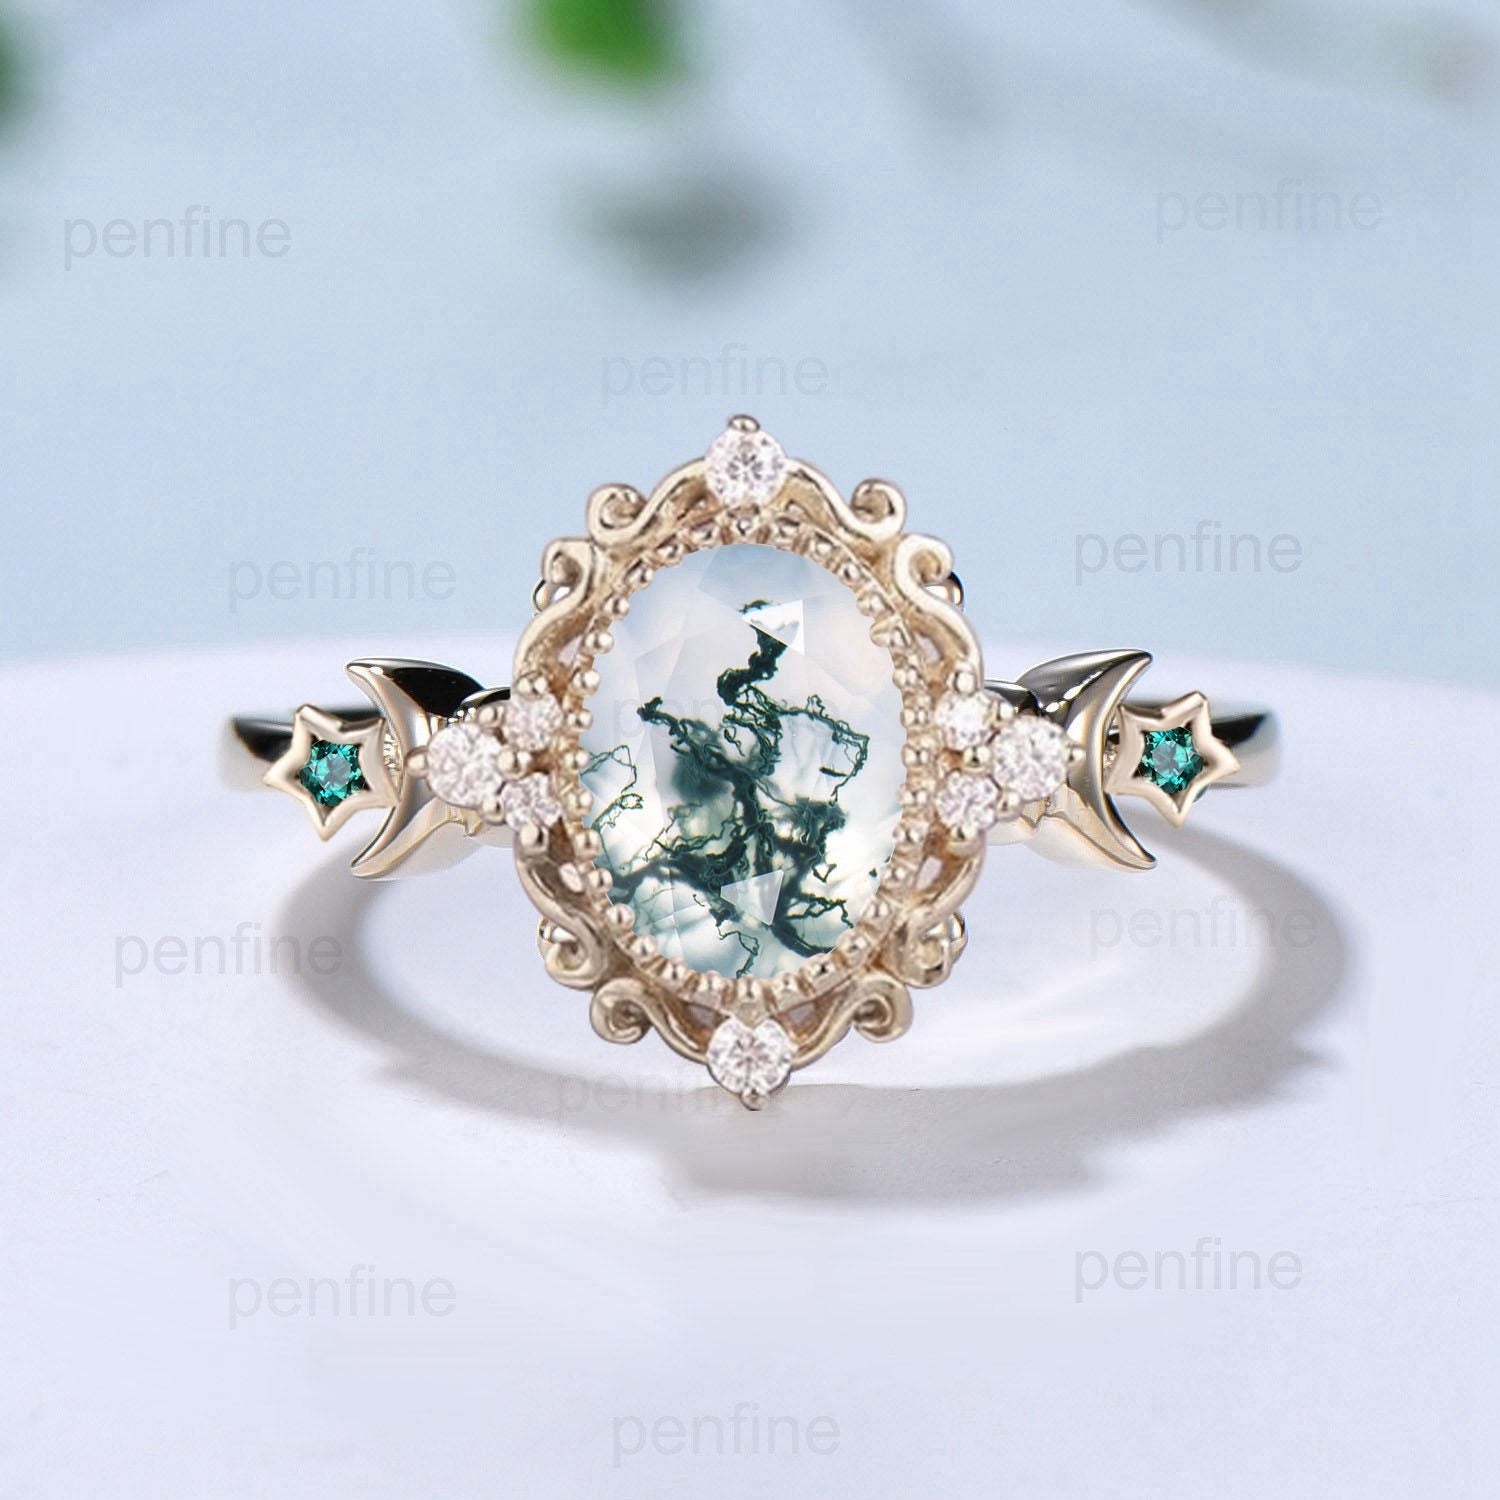 Vintage Oval Moss Agate Engagement Ring Unique Nature Inspired Crescent Moon Green Agate Emerald Star Wedding Ring Unique Anniversary gift - PENFINE